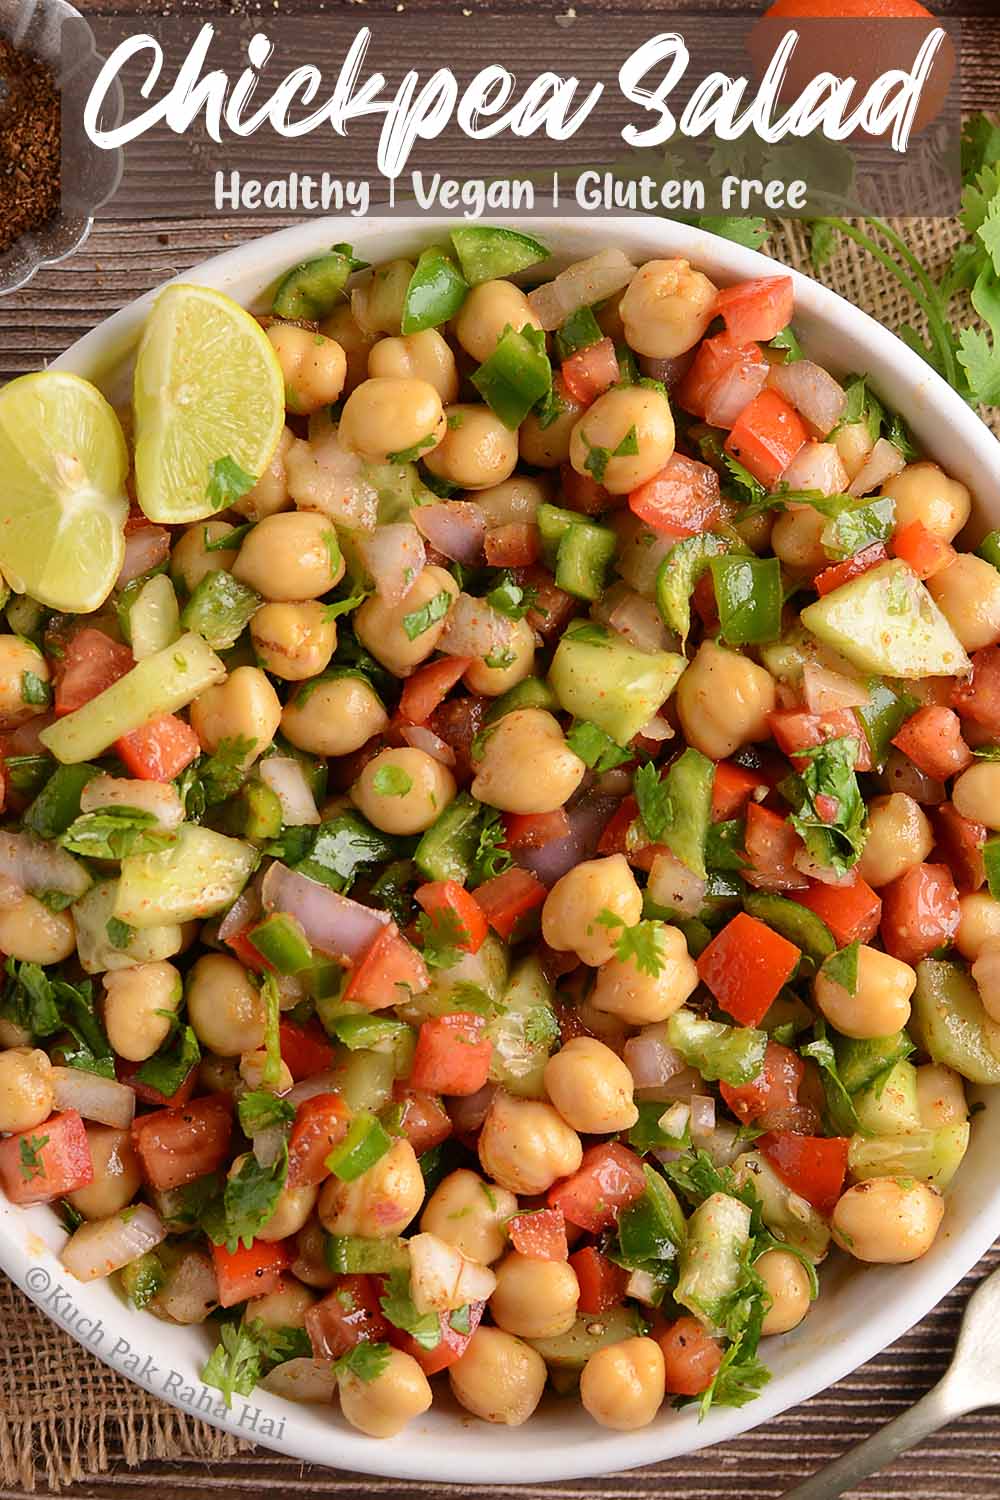 Chickpea salad easy protein dinner recipe.